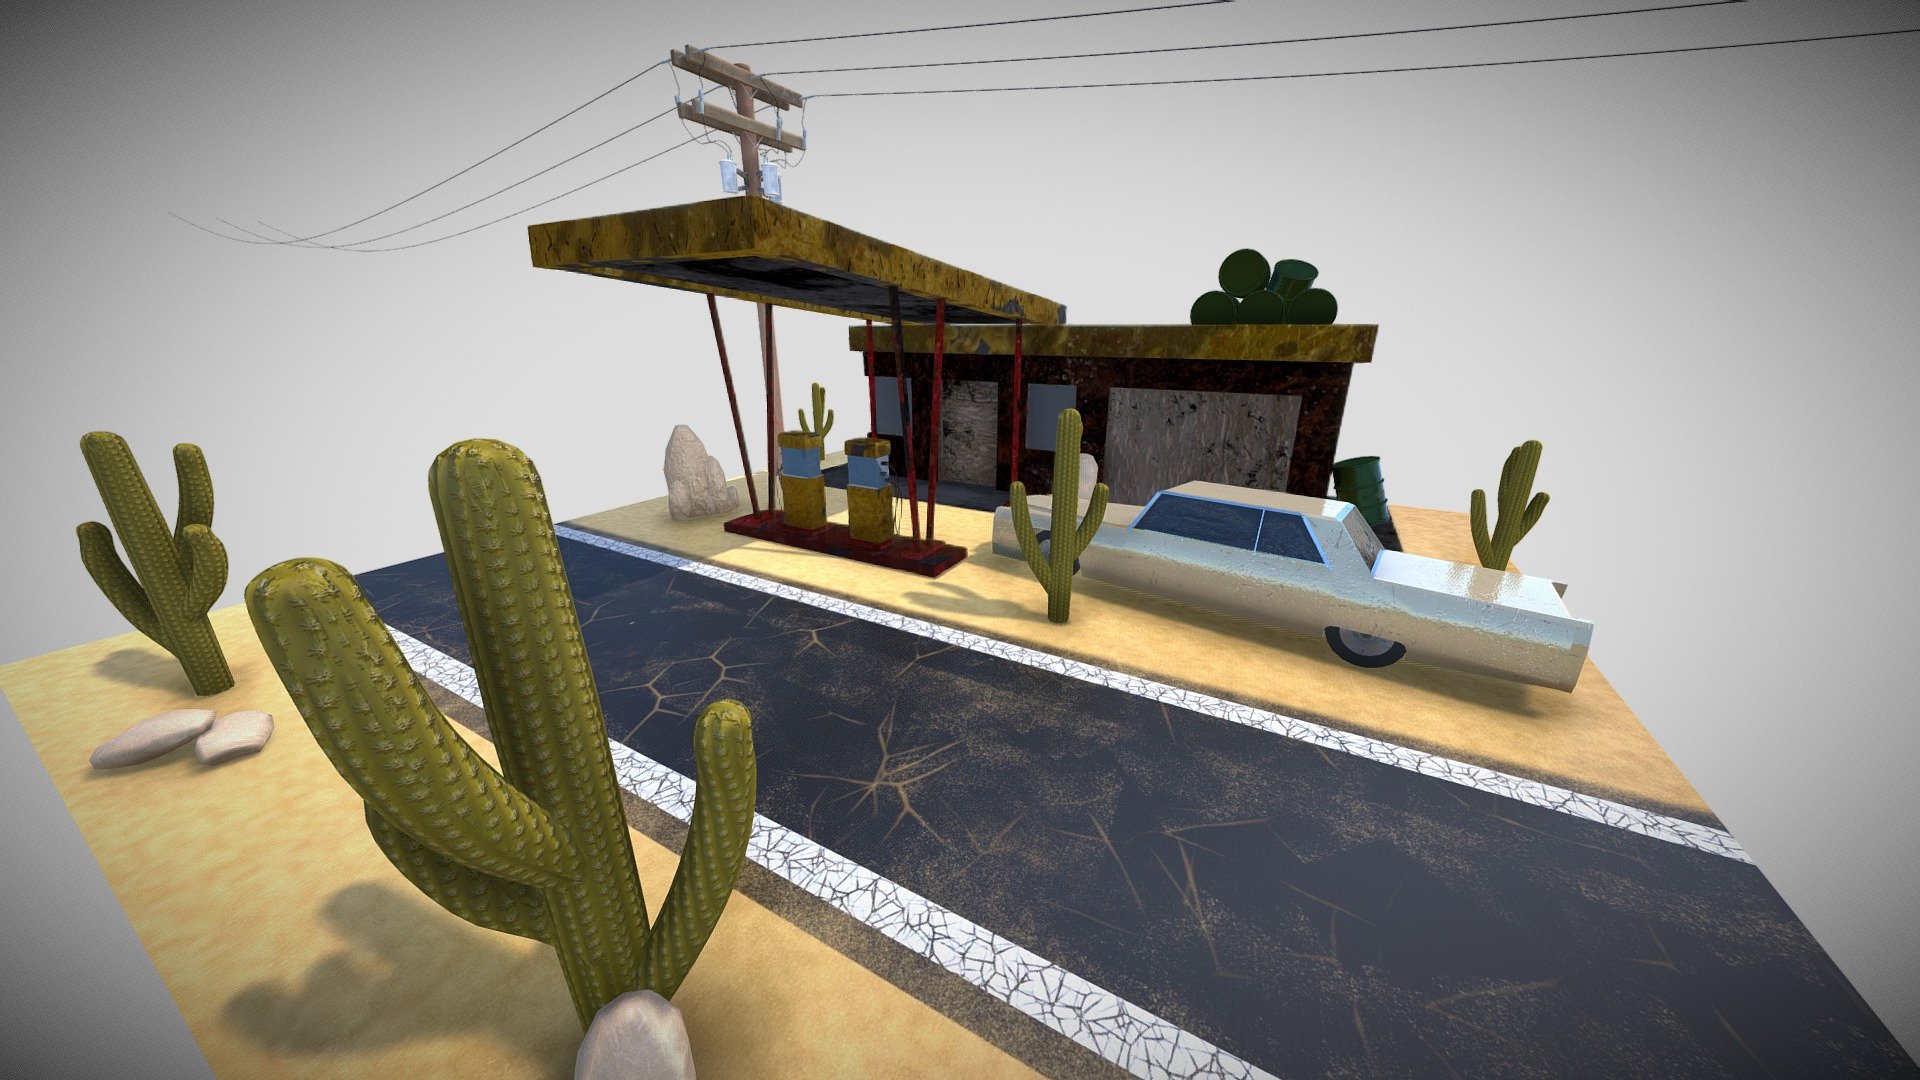 Diorama created for my Game Design &amp; Production Module @ Abertay University
Desert road with an abandoned gas station and car. Also has some barrels, cacti, rocks and a telephone pole - Desert Road Scene - 3D model by lgoodn123 3d model